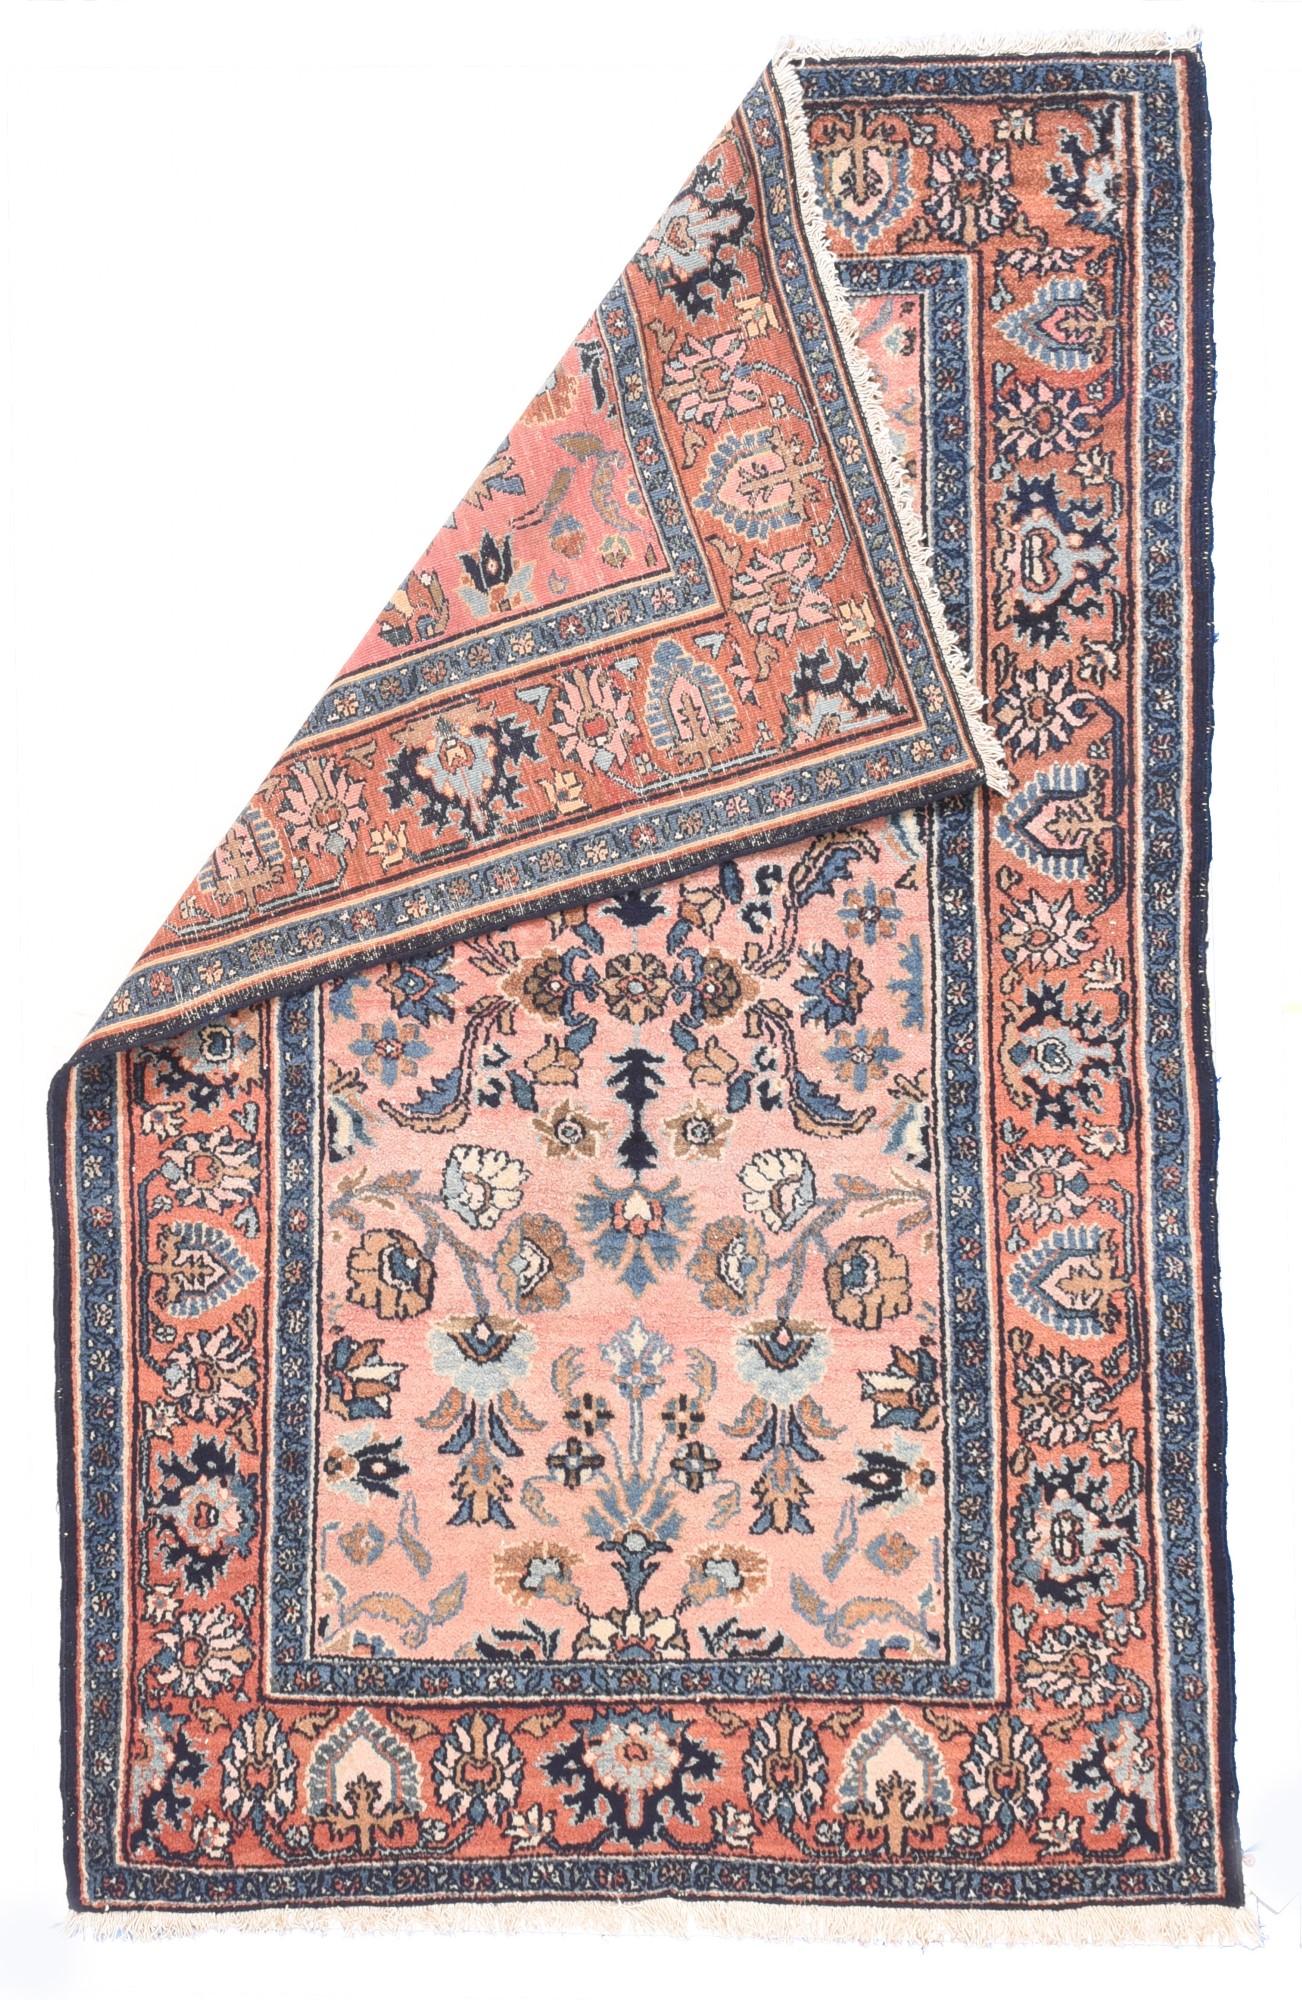 Antique Lilihan Rug 4'1'' x 6'3''. A soft rose border of petal and ragged palmettes in dark and light blue frames the buff field with a centralized pattern of fictional flowers and bitonal leaves. The detached floral pattern shows the influence of